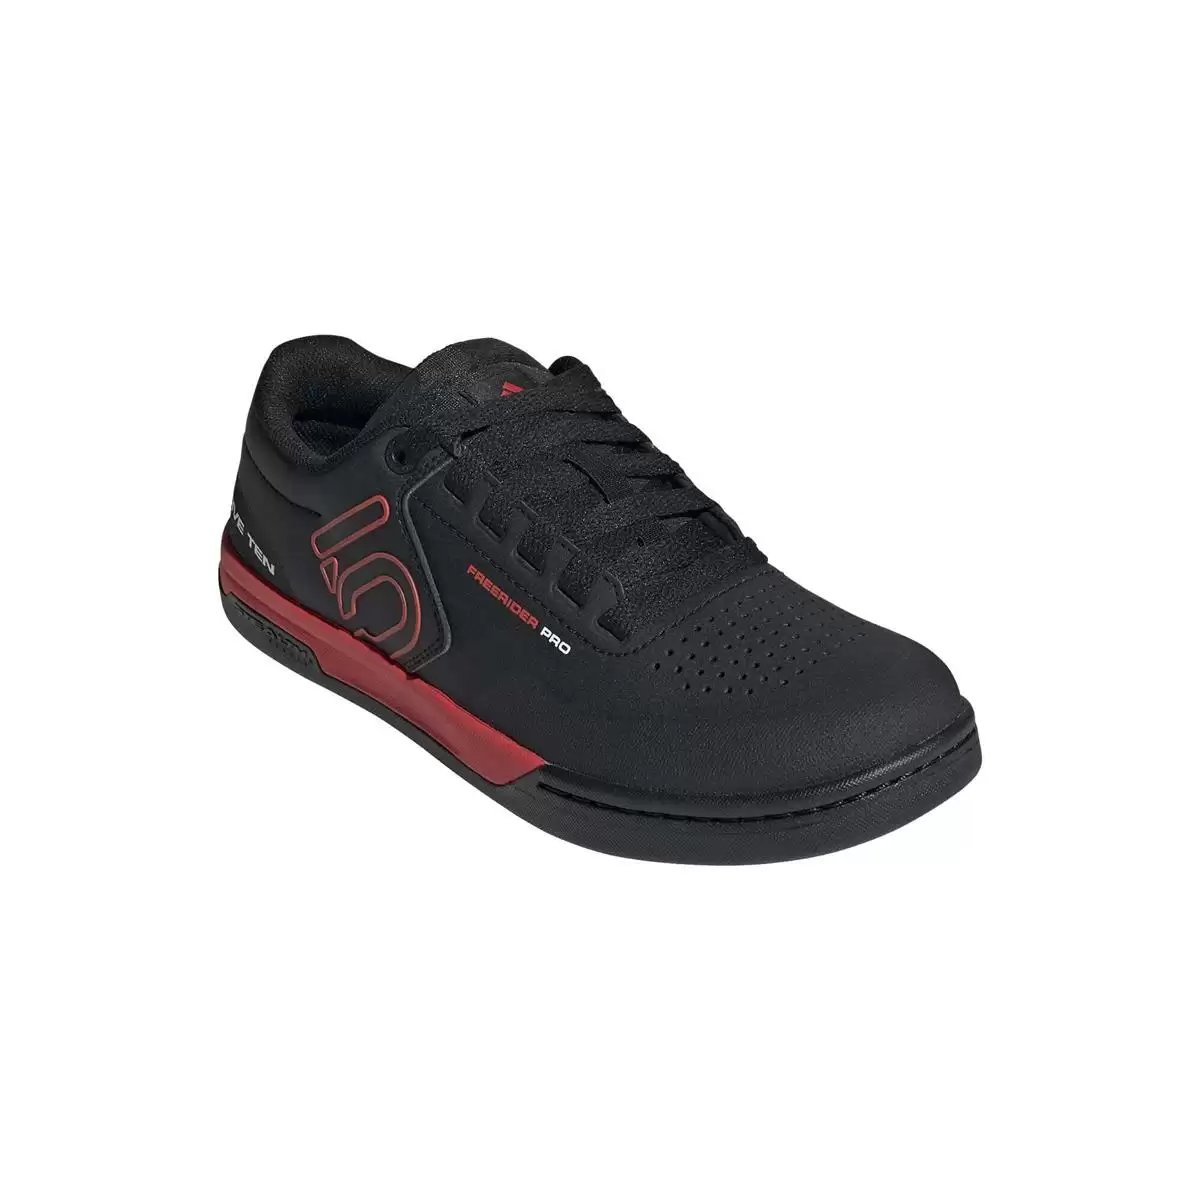 MTB Flat Shoes Freerider Pro Black/Red Size 41 #1